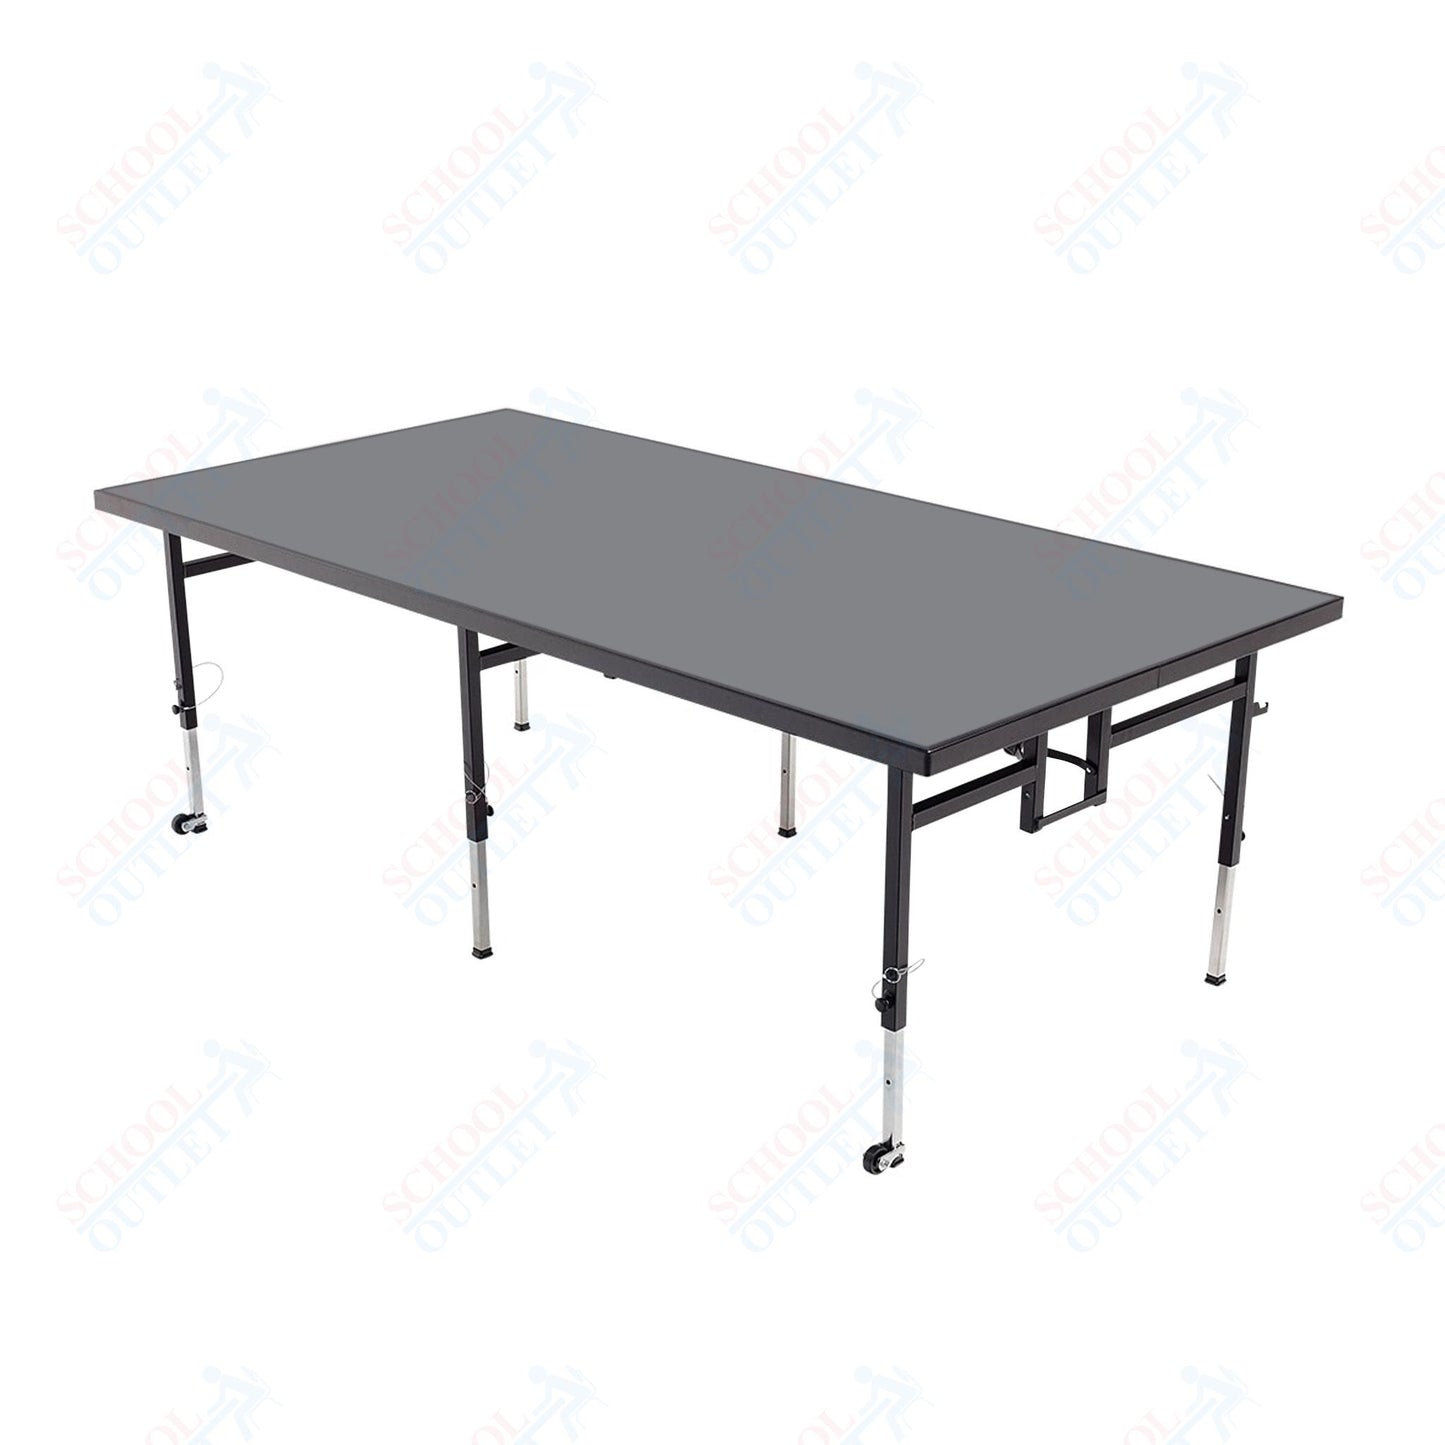 AmTab Adjustable Height Stage - Polypropylene Top - 48"W x 48"L x Adjustable 24" to 32"H  (AmTab AMT-STA4424P)